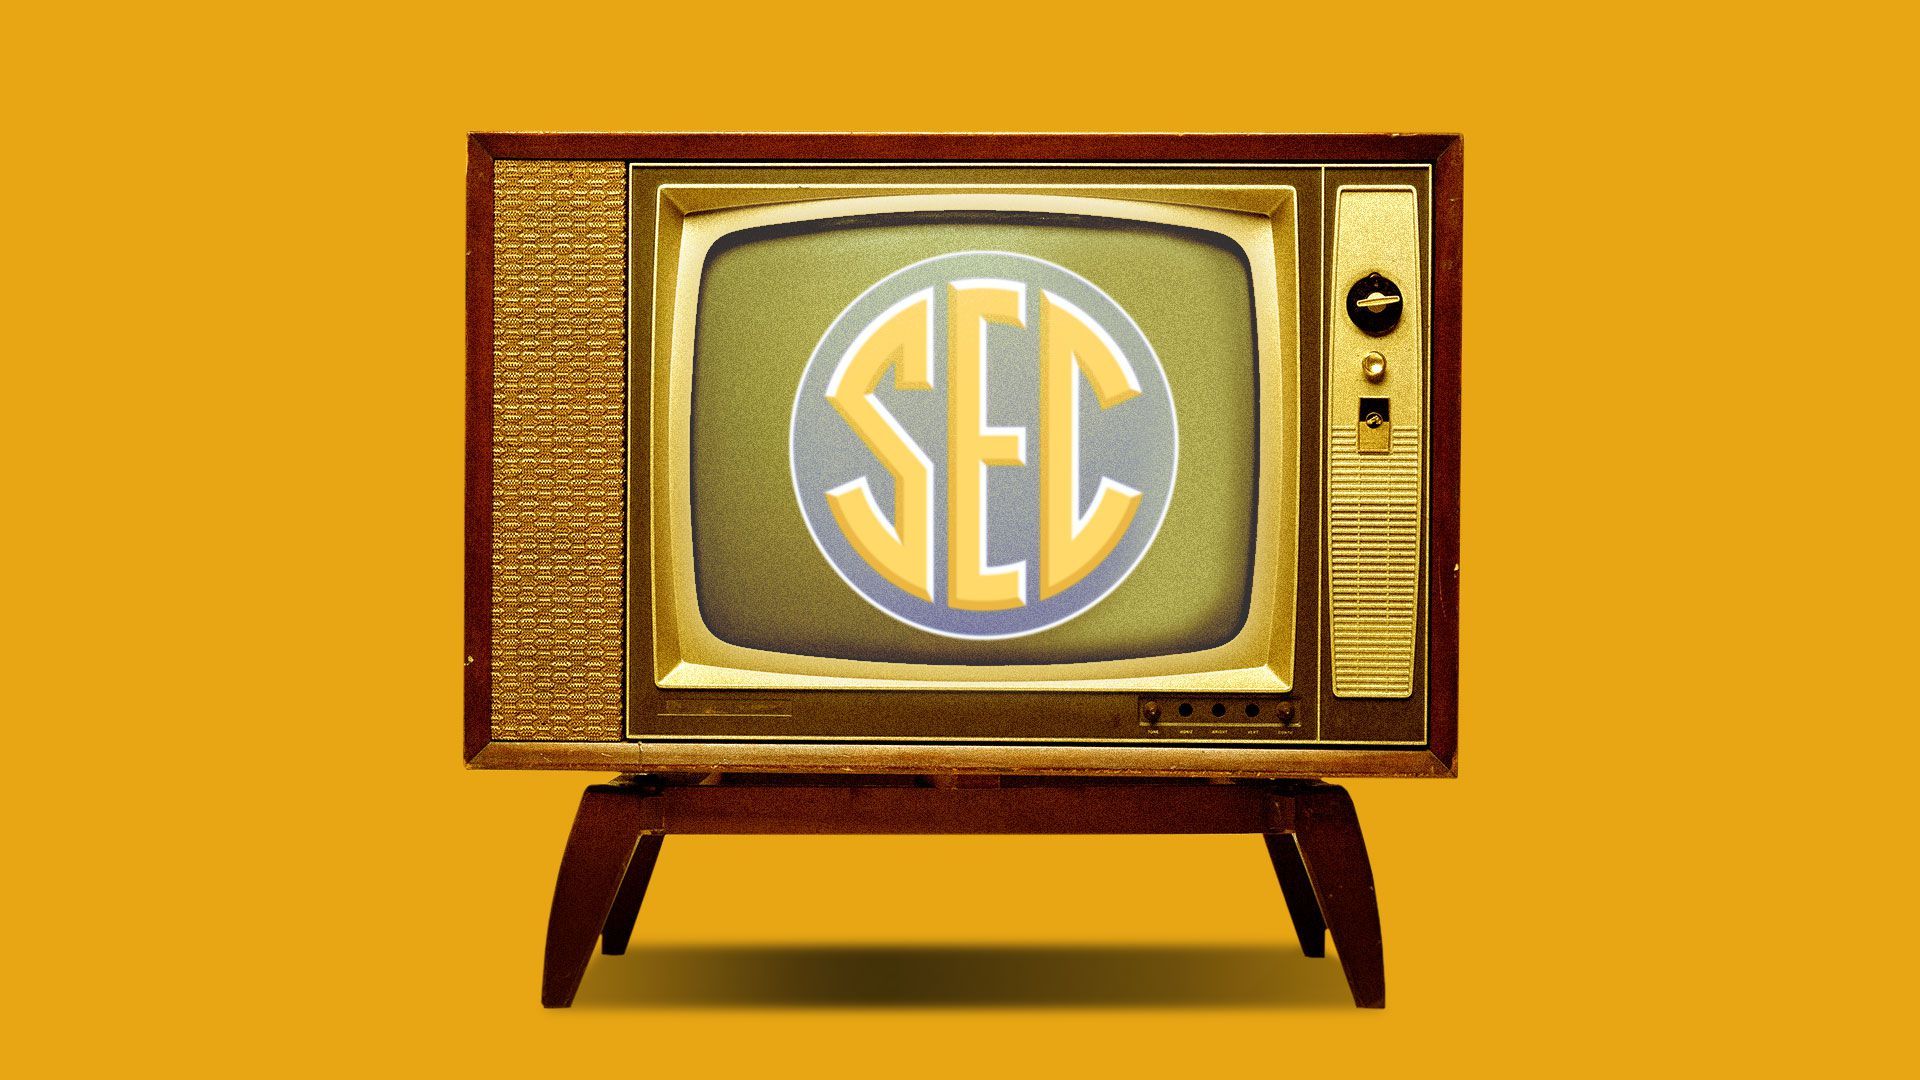 Illustration of a television with the SEC logo